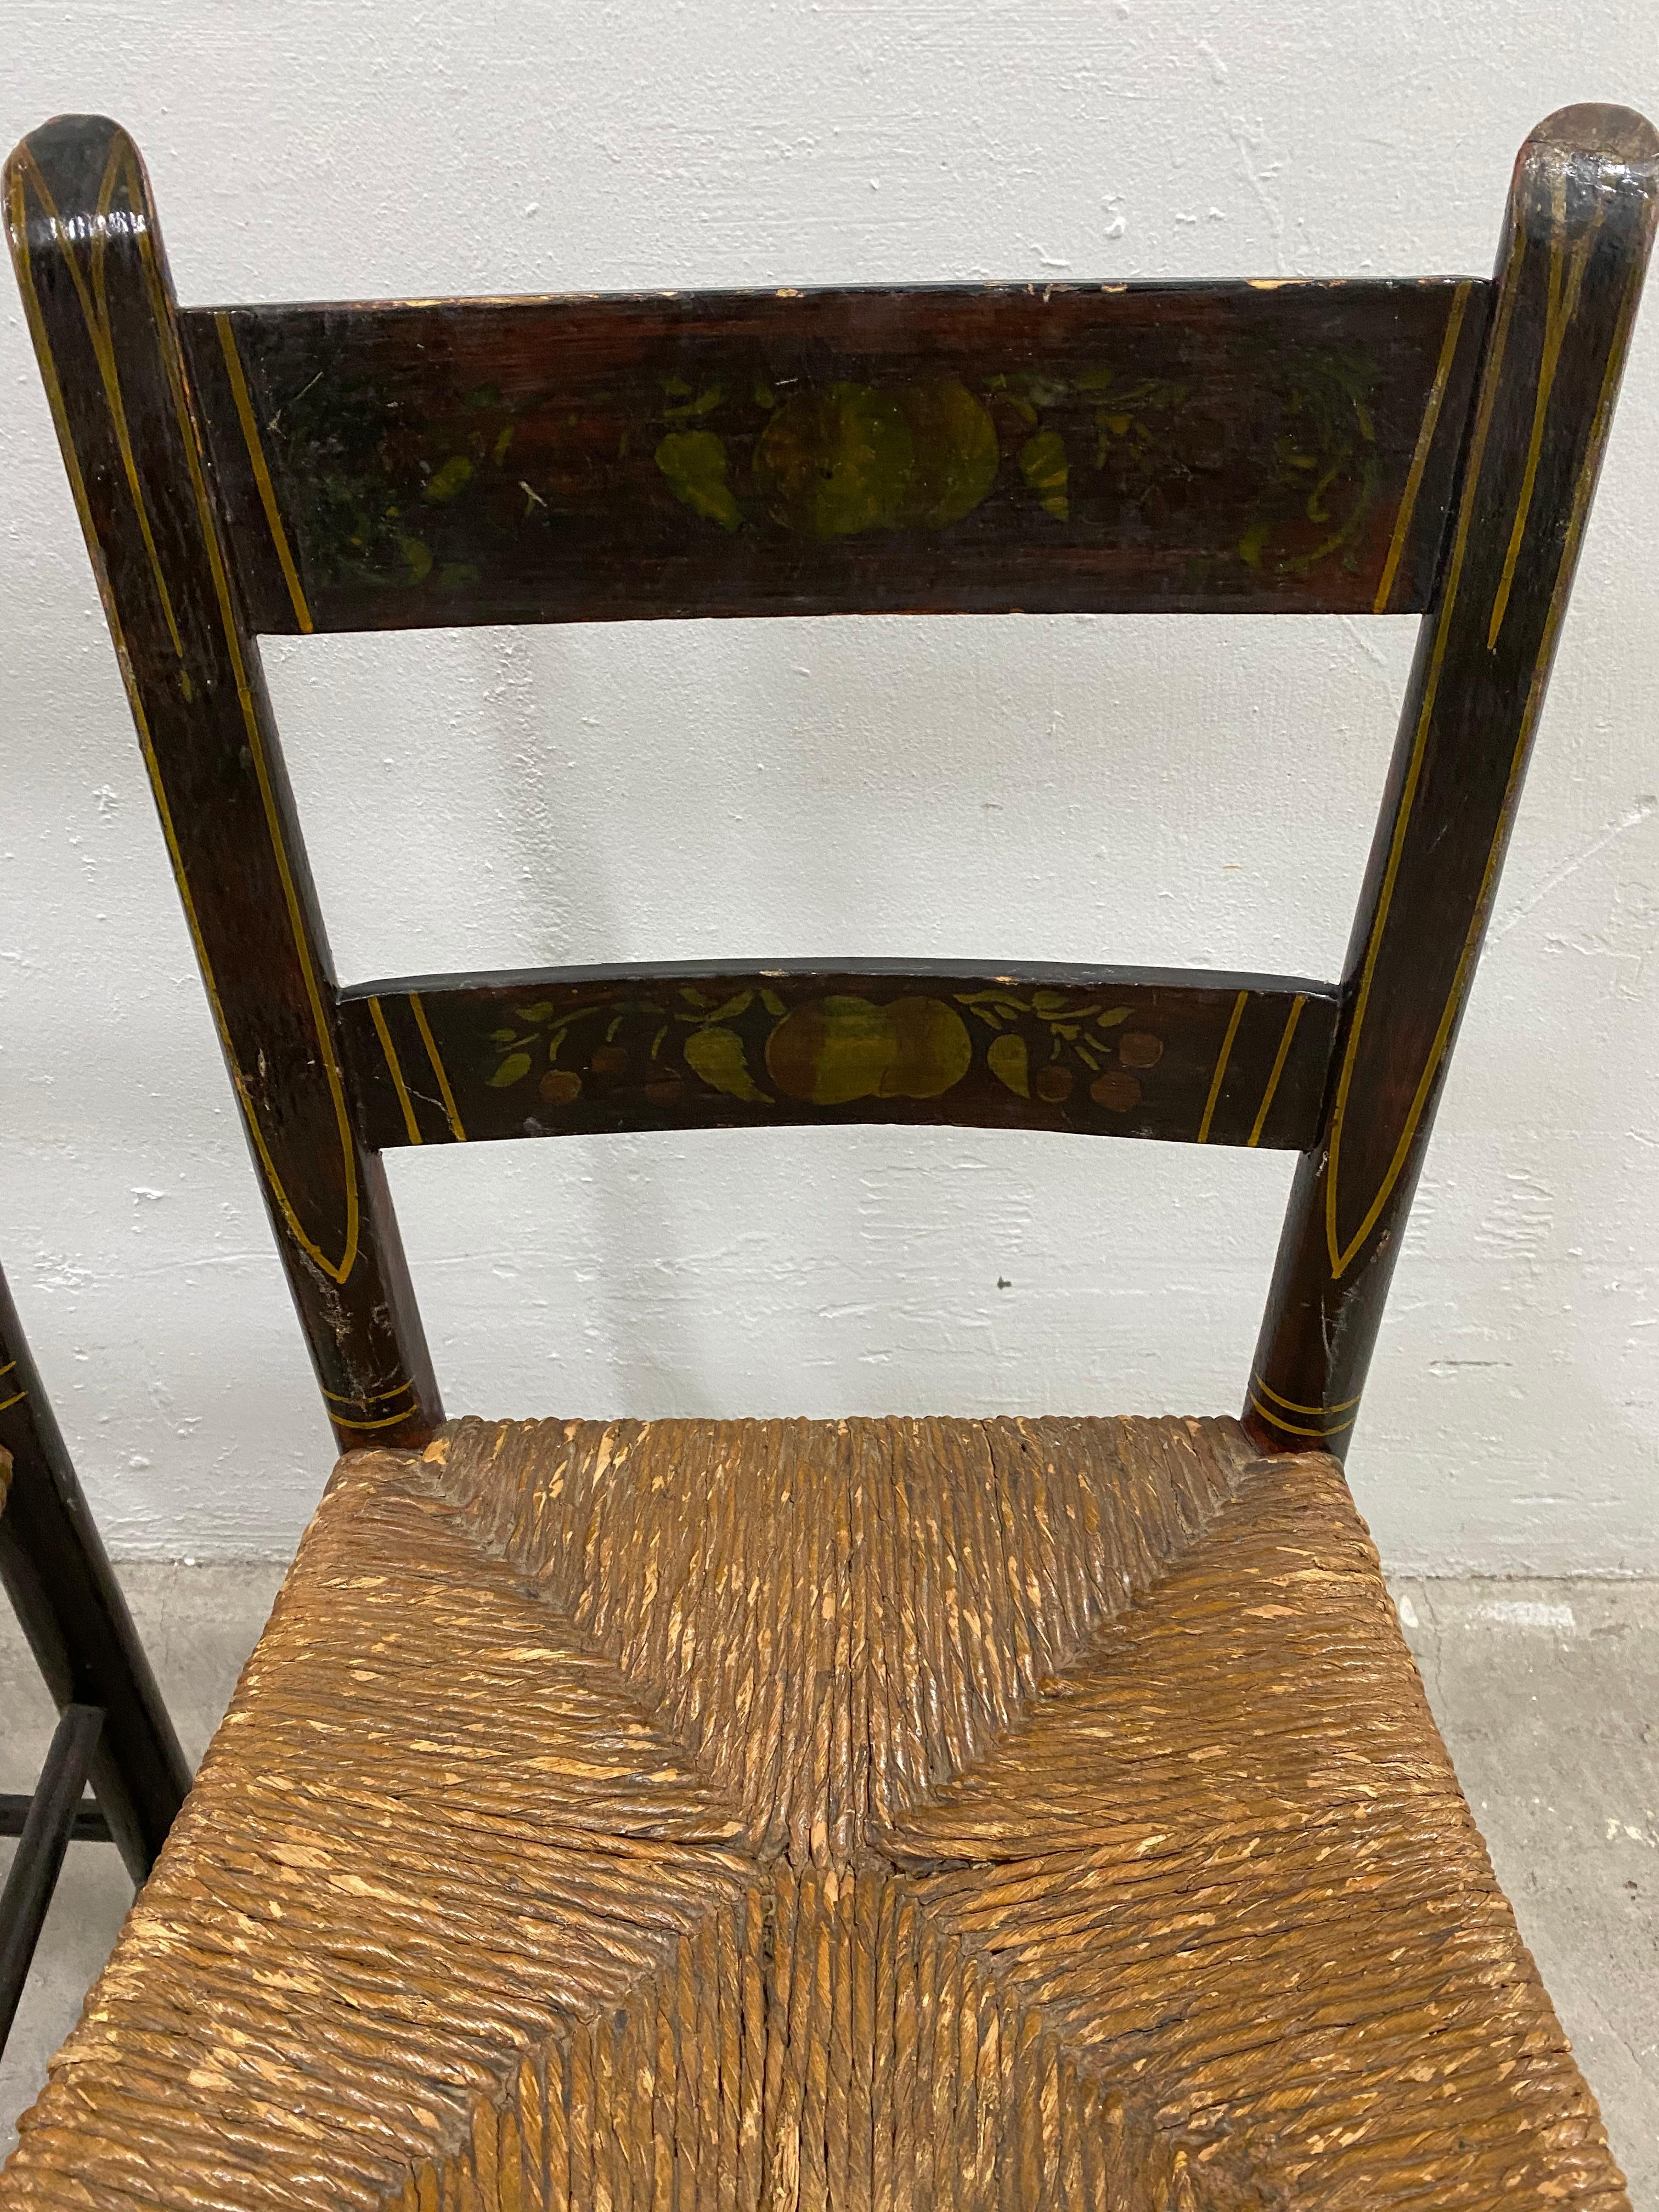 Lot of Six Mid-19th Century Mis-Matched American Hitchcock Side Chairs 5